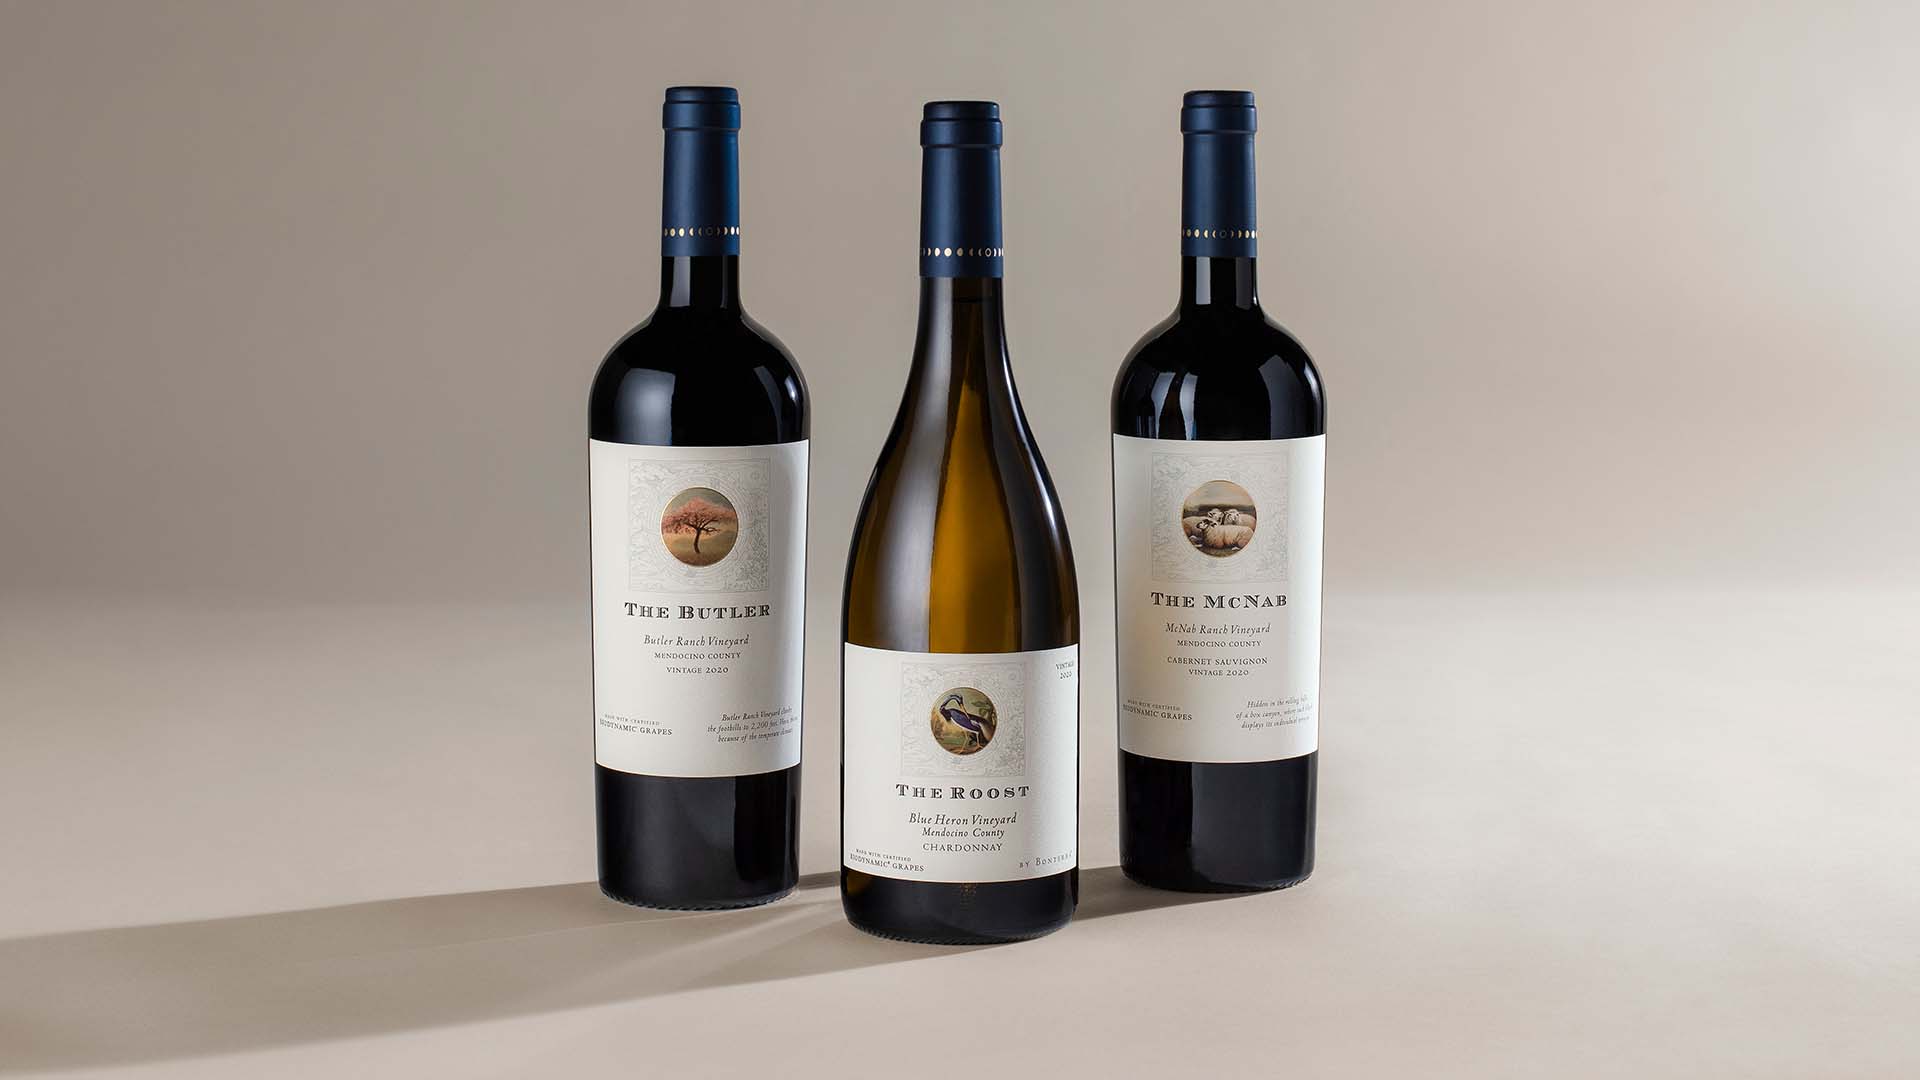 Stylized photo of bottles of Bonterra Single Vineyard The Butler, The Roost, and The McNab